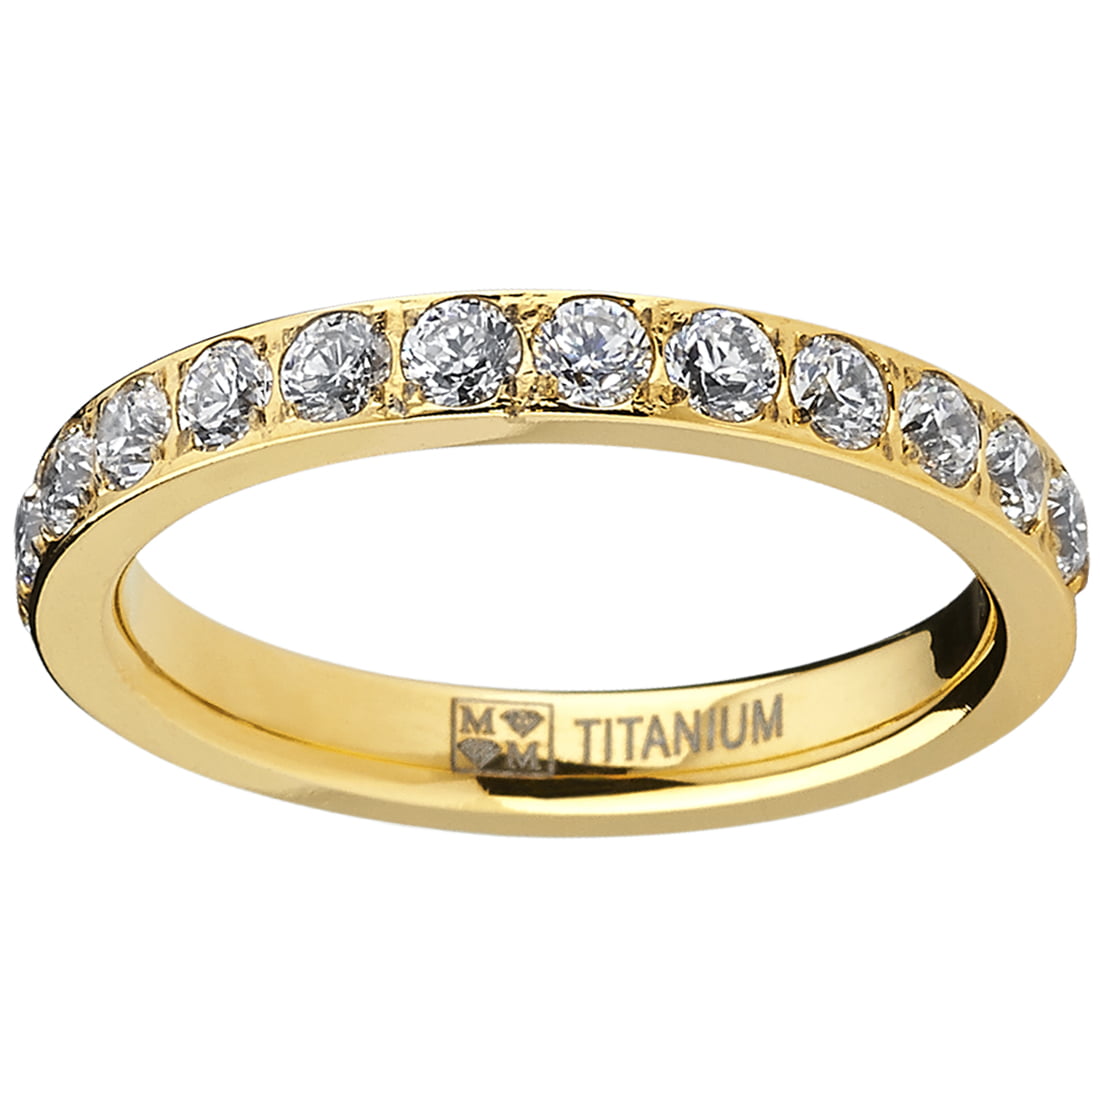 3MM Women's Goldtone Plated Titanium Eternity Ring, Wedding Band with Pave  Set Cubic Zirconia 7